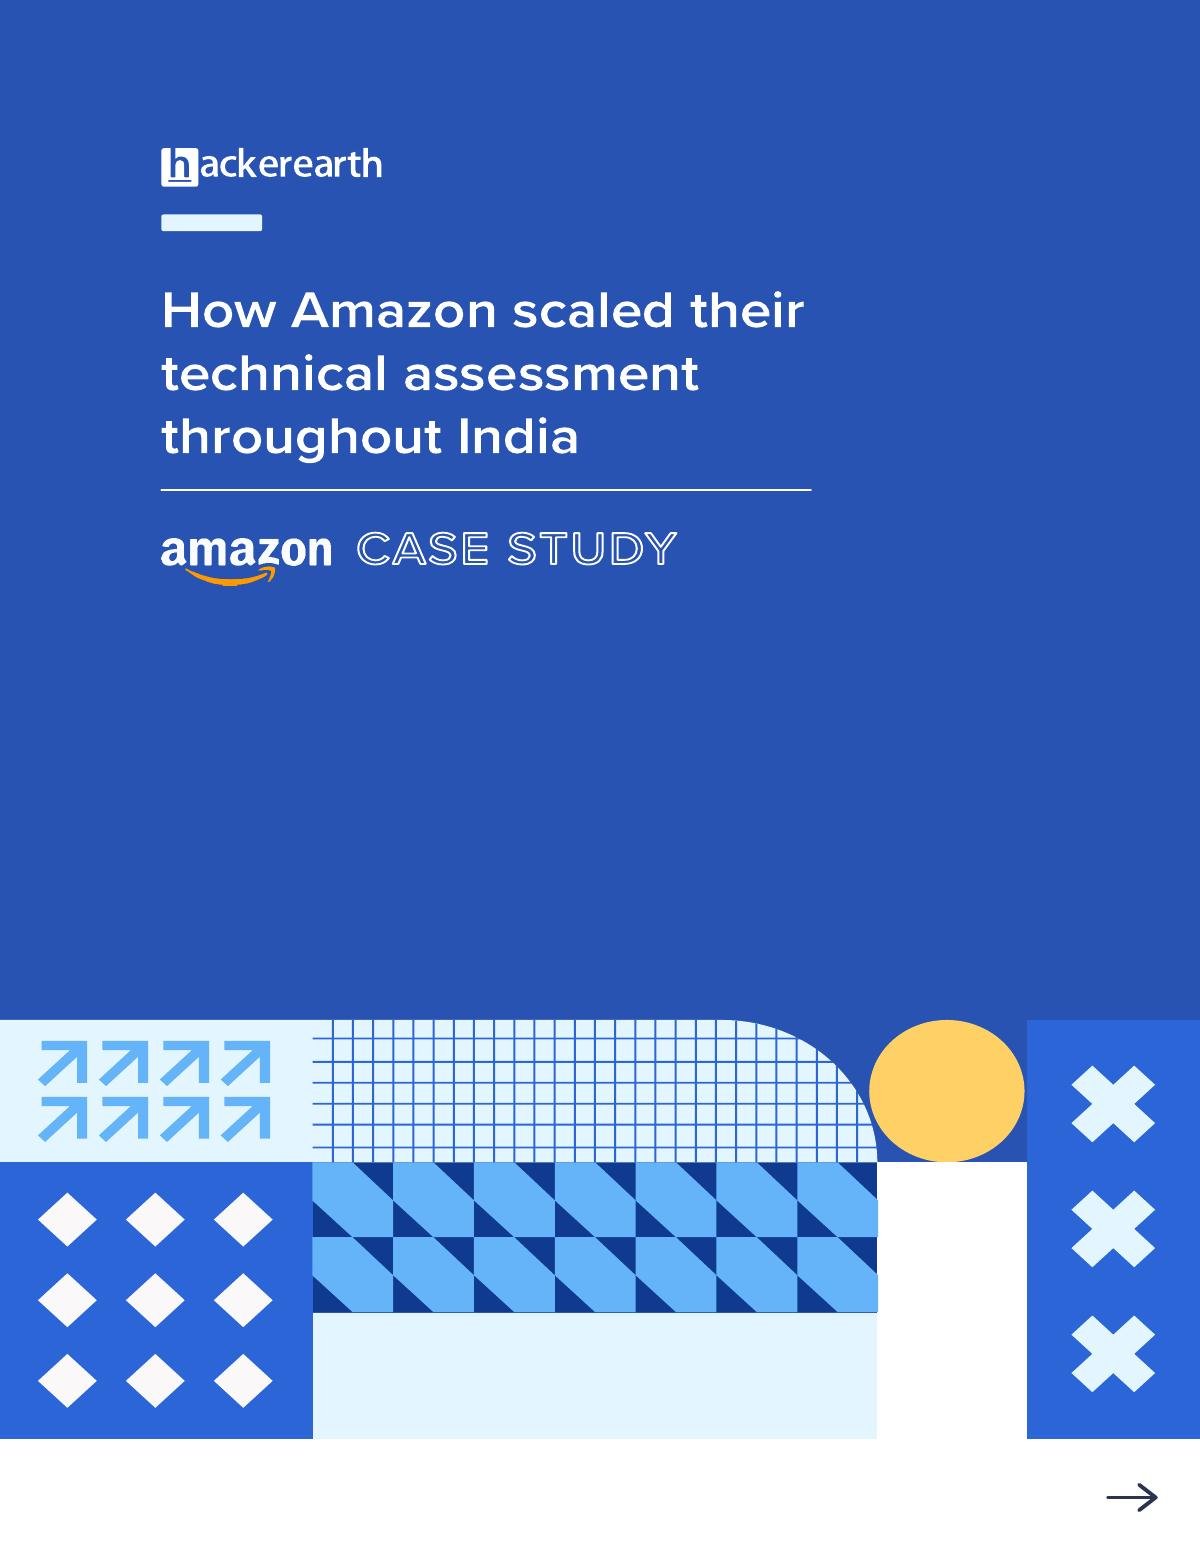 How Amazon scaled their technical assessment throughout India